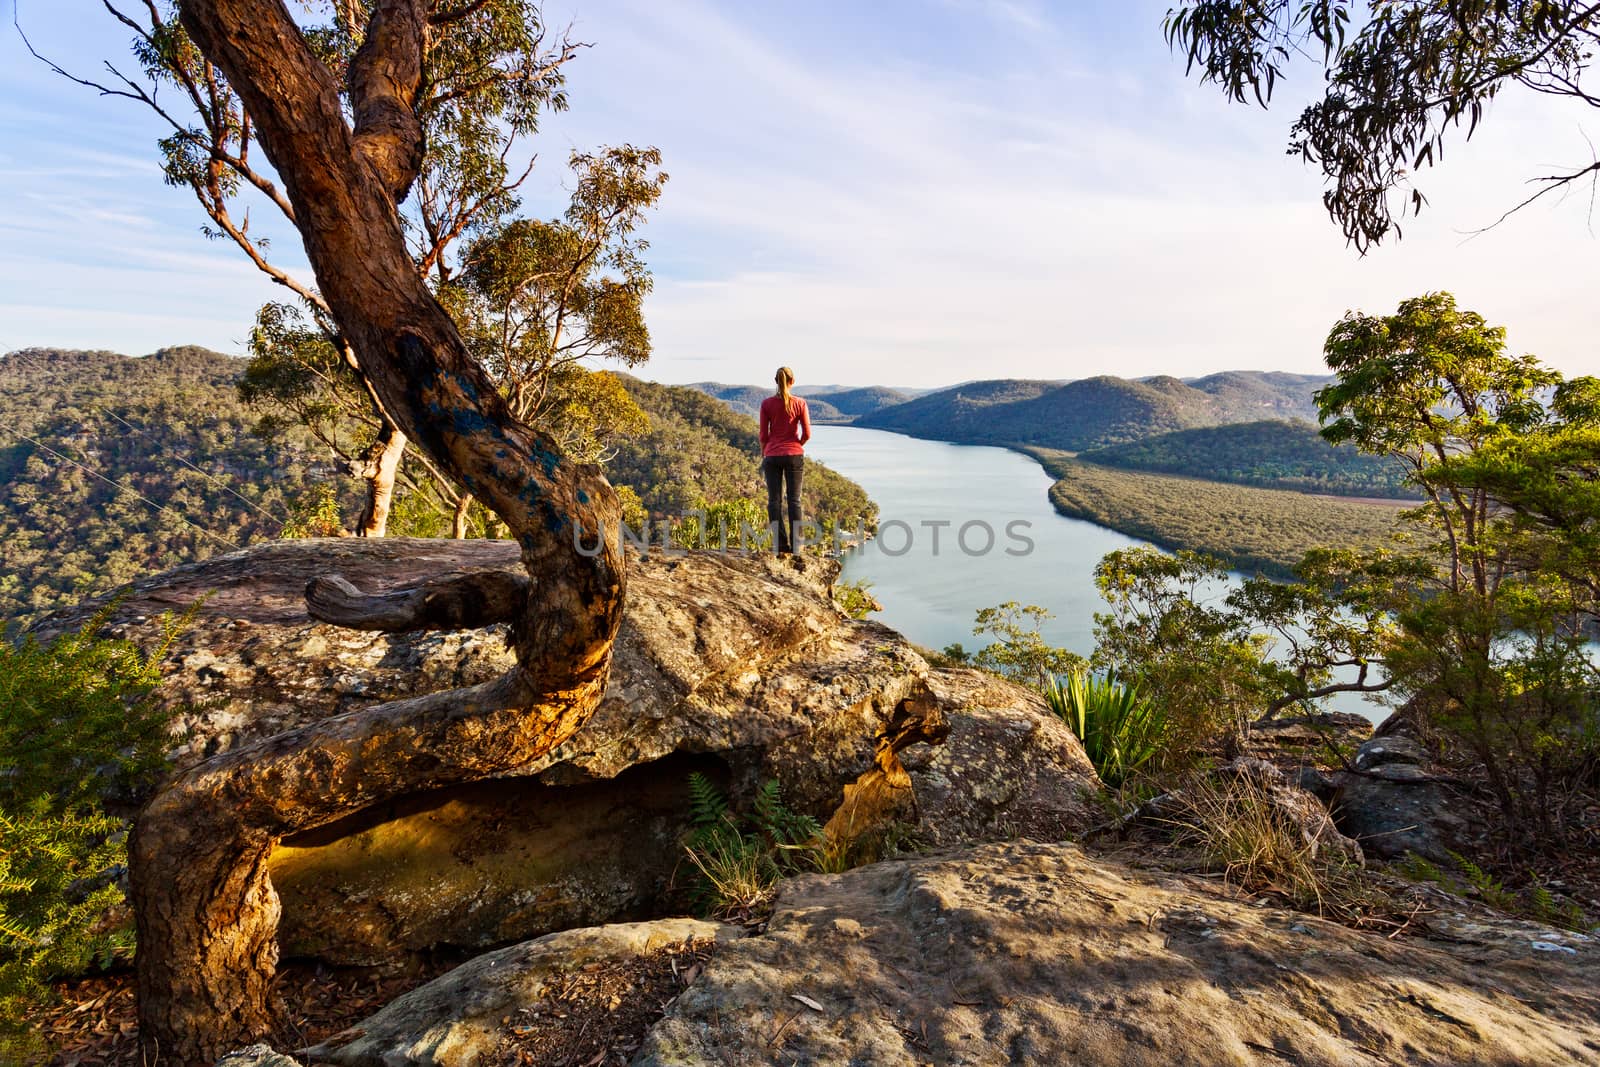 Female standis on the edge of the cliff with clear views out over the snaking river and mountain scenery